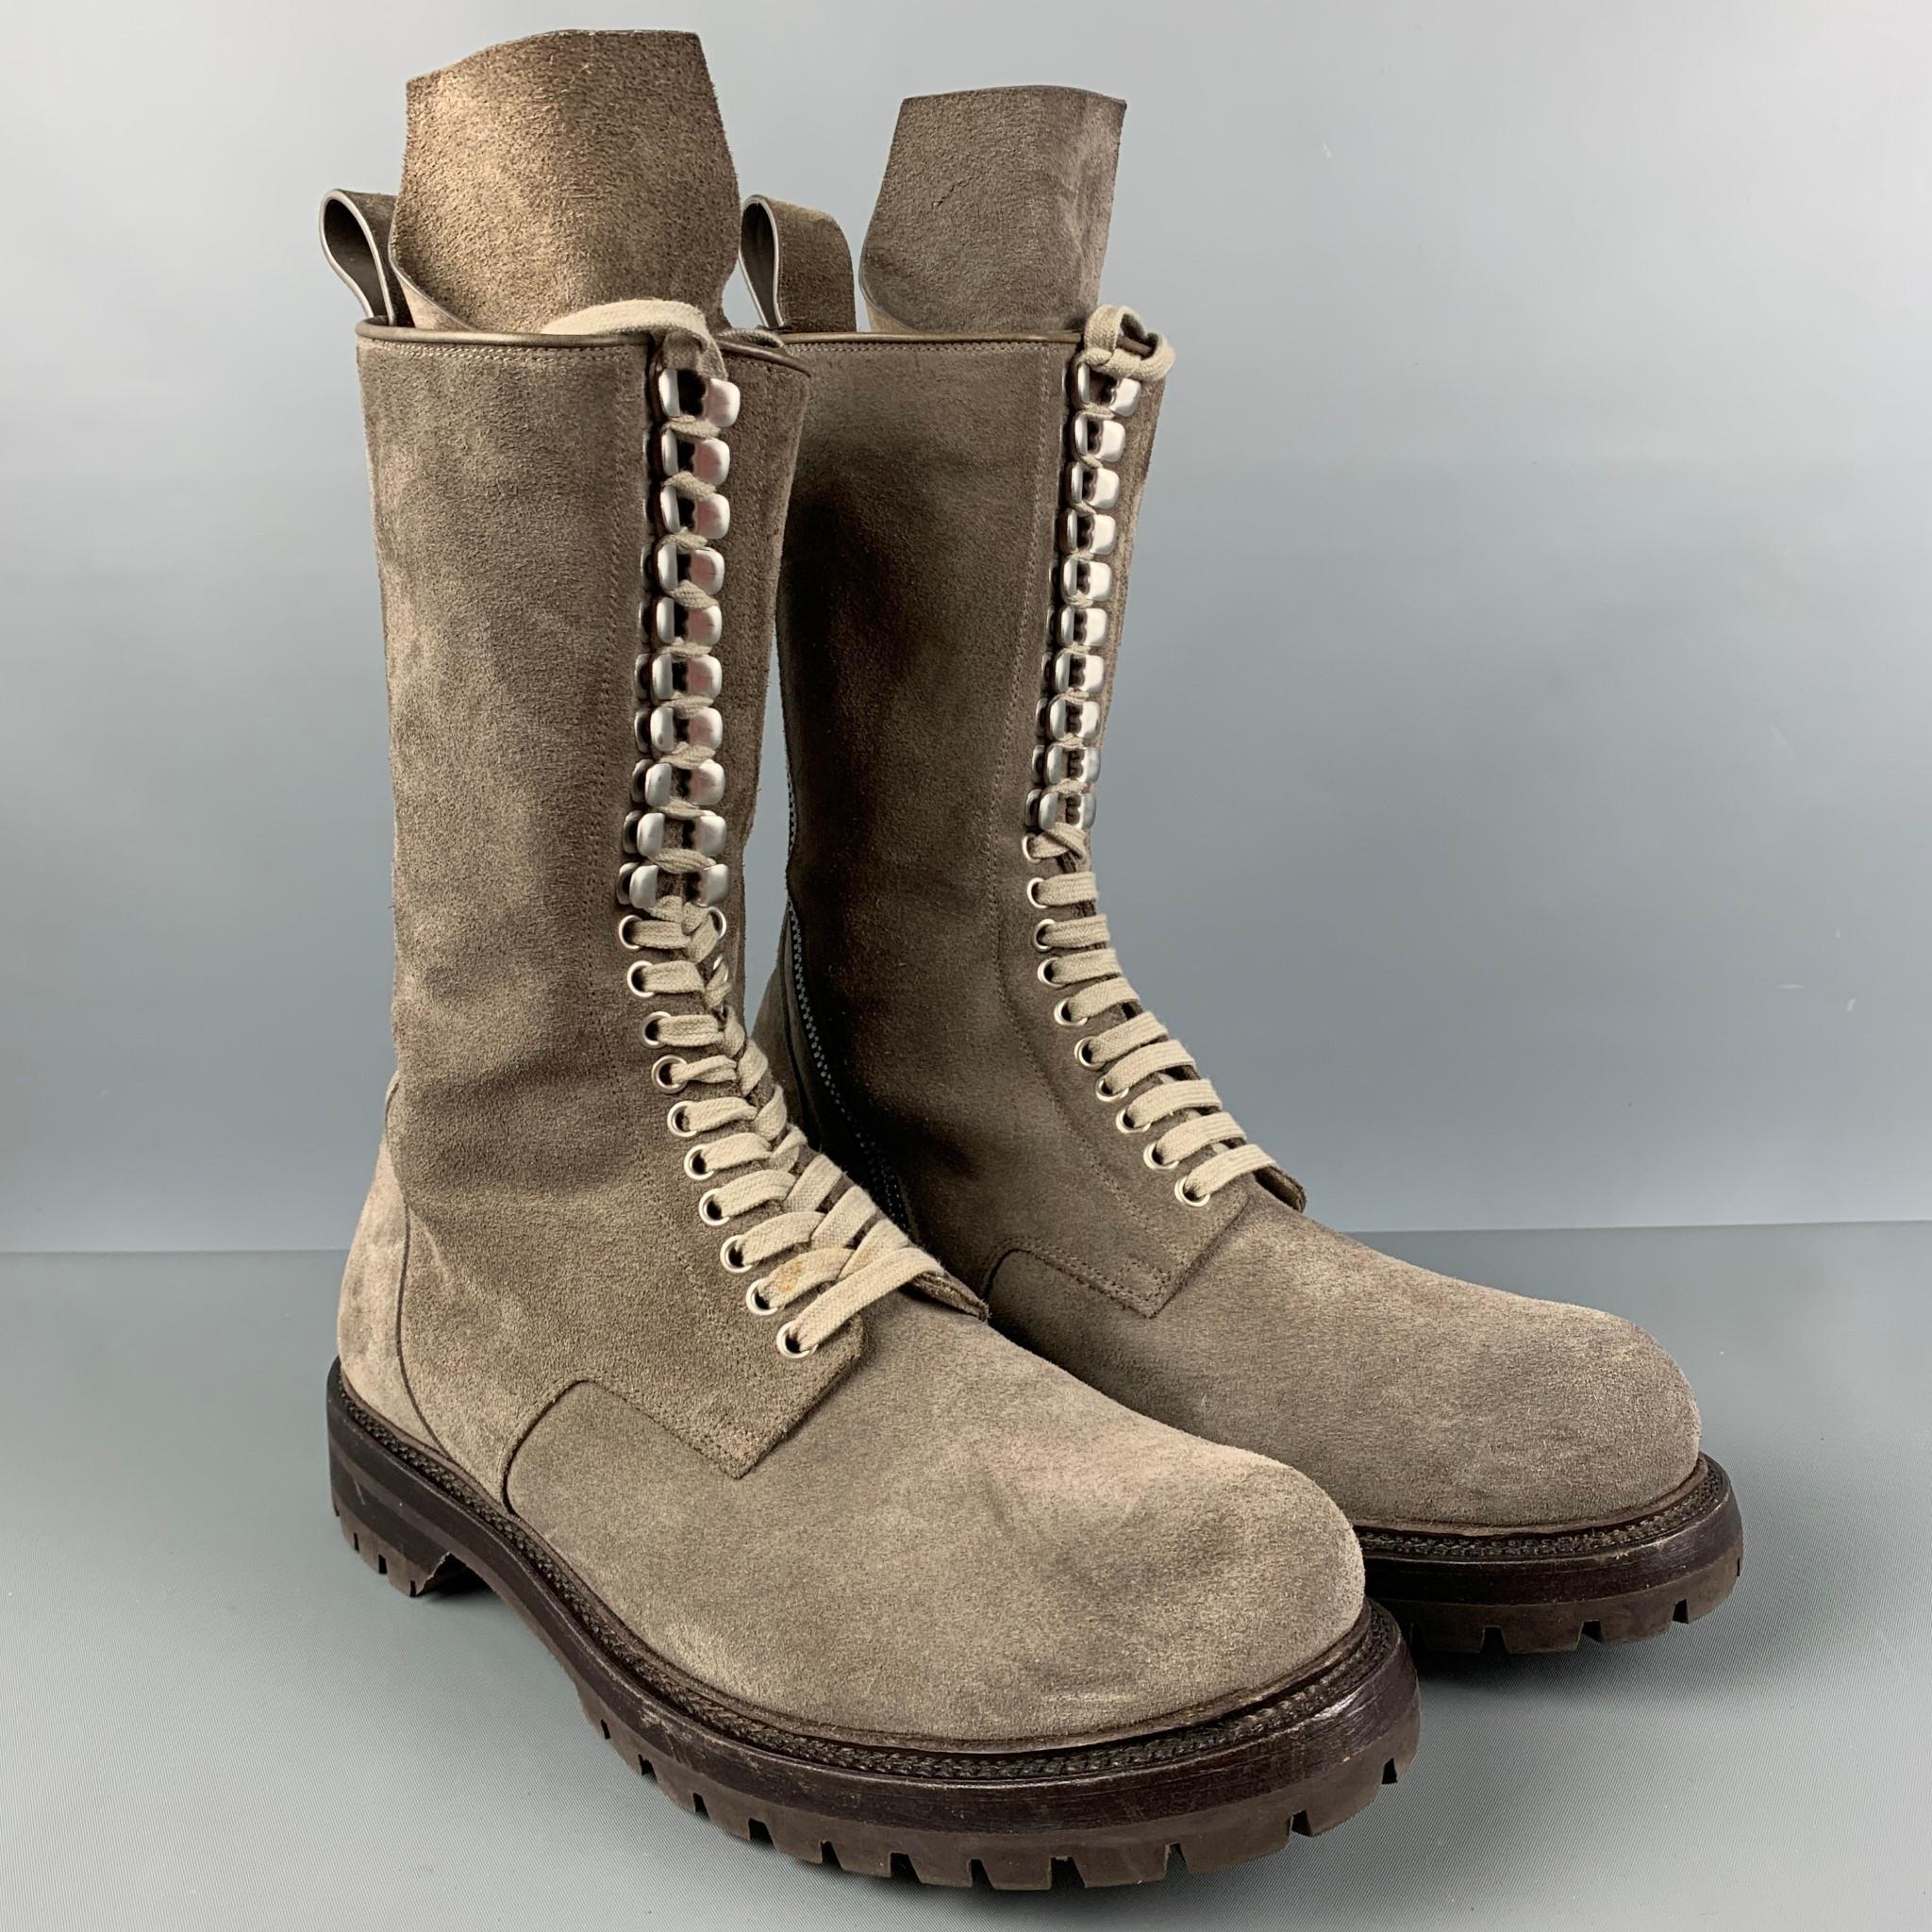 RICK OWENS 'Army' mid-calf boots comes in a taupe suede featuring side zipper detail, round toe, gunmetal tone hardware, and a lace up closure. 

Very Good Pre-Owned Condition. Small mark at shoelace. As-Is.
Marked: 44

Measurements:

Length: 12.75